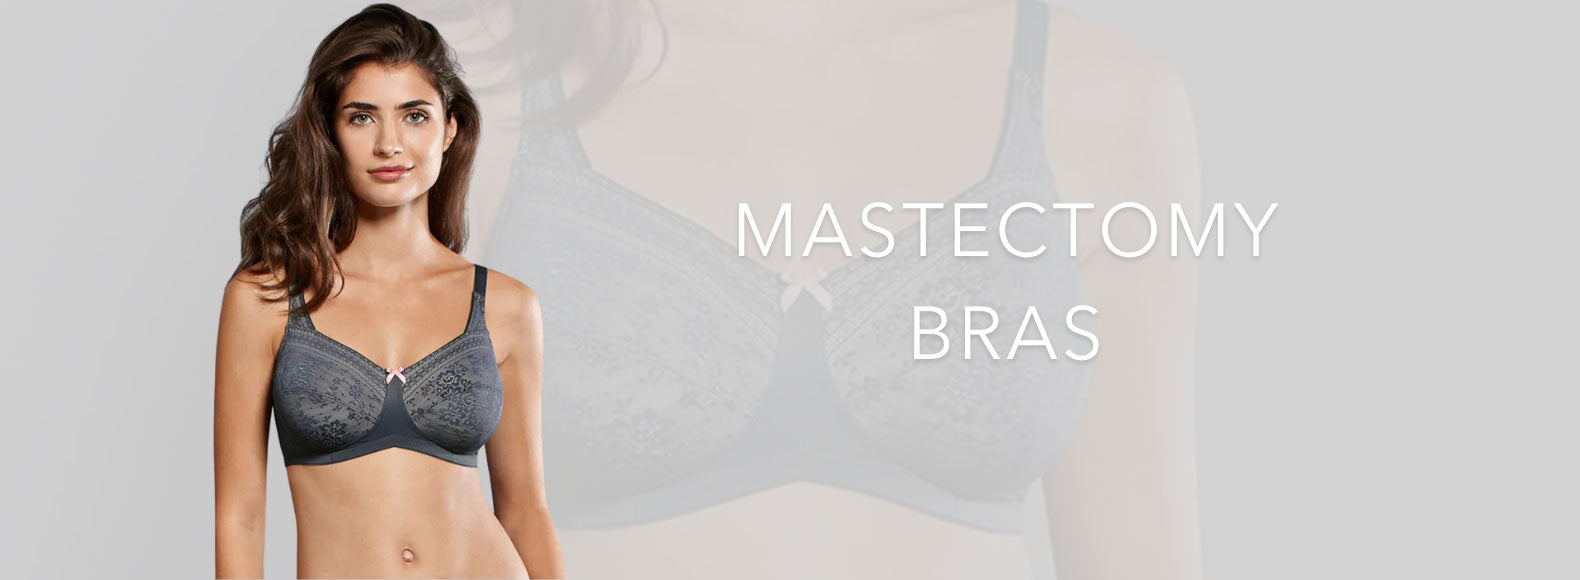 Mastectomy Bras Collections